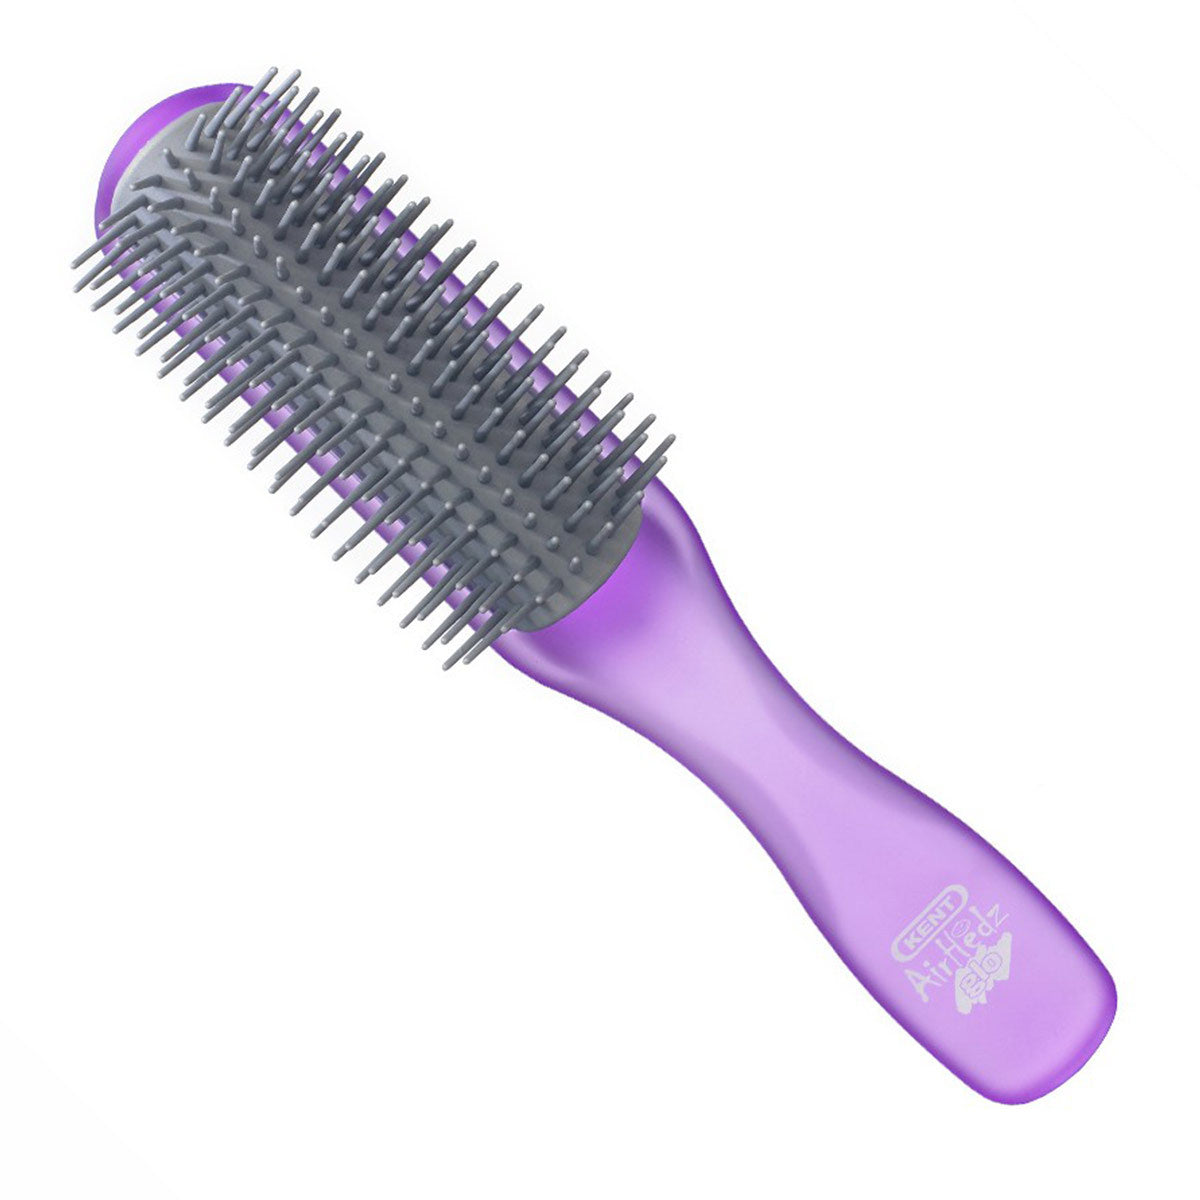 Primary image of Airhedz Glo Half Radial Hairbrush for Long Hair - AHGLO01